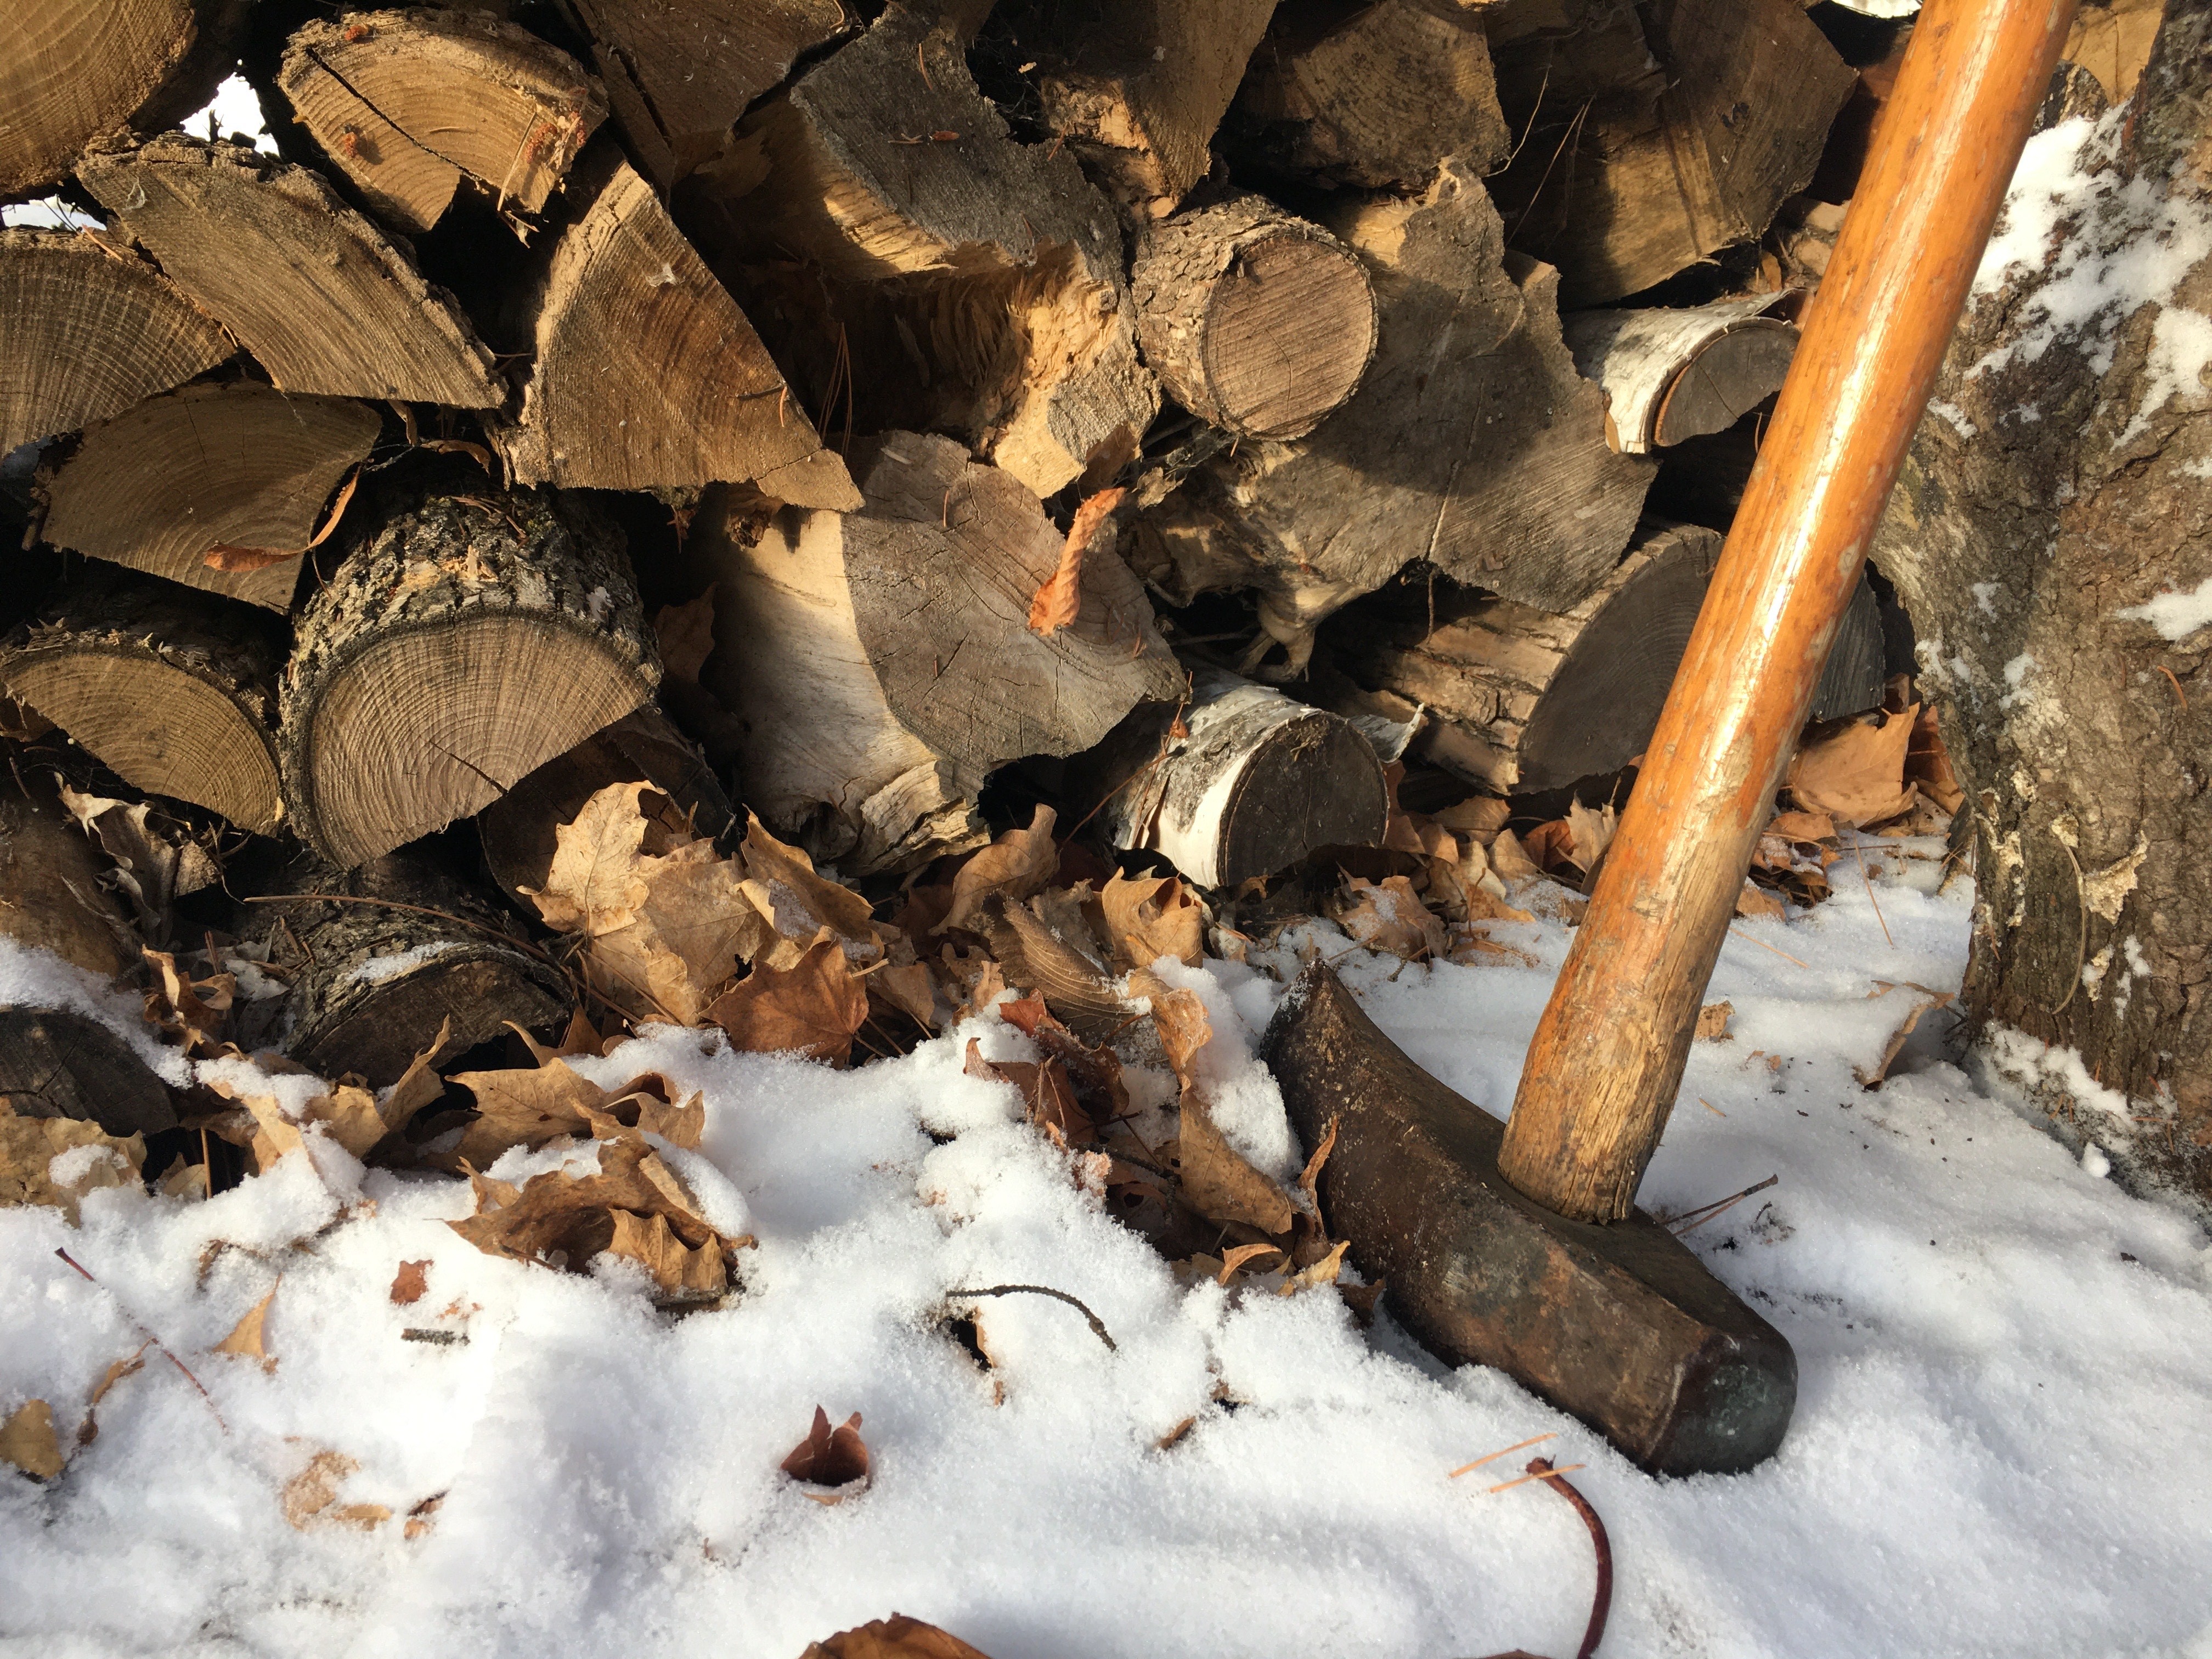 Most hardwood tree species can provide about 8,600 British thermal units of heat per pound. (NDSU photo)